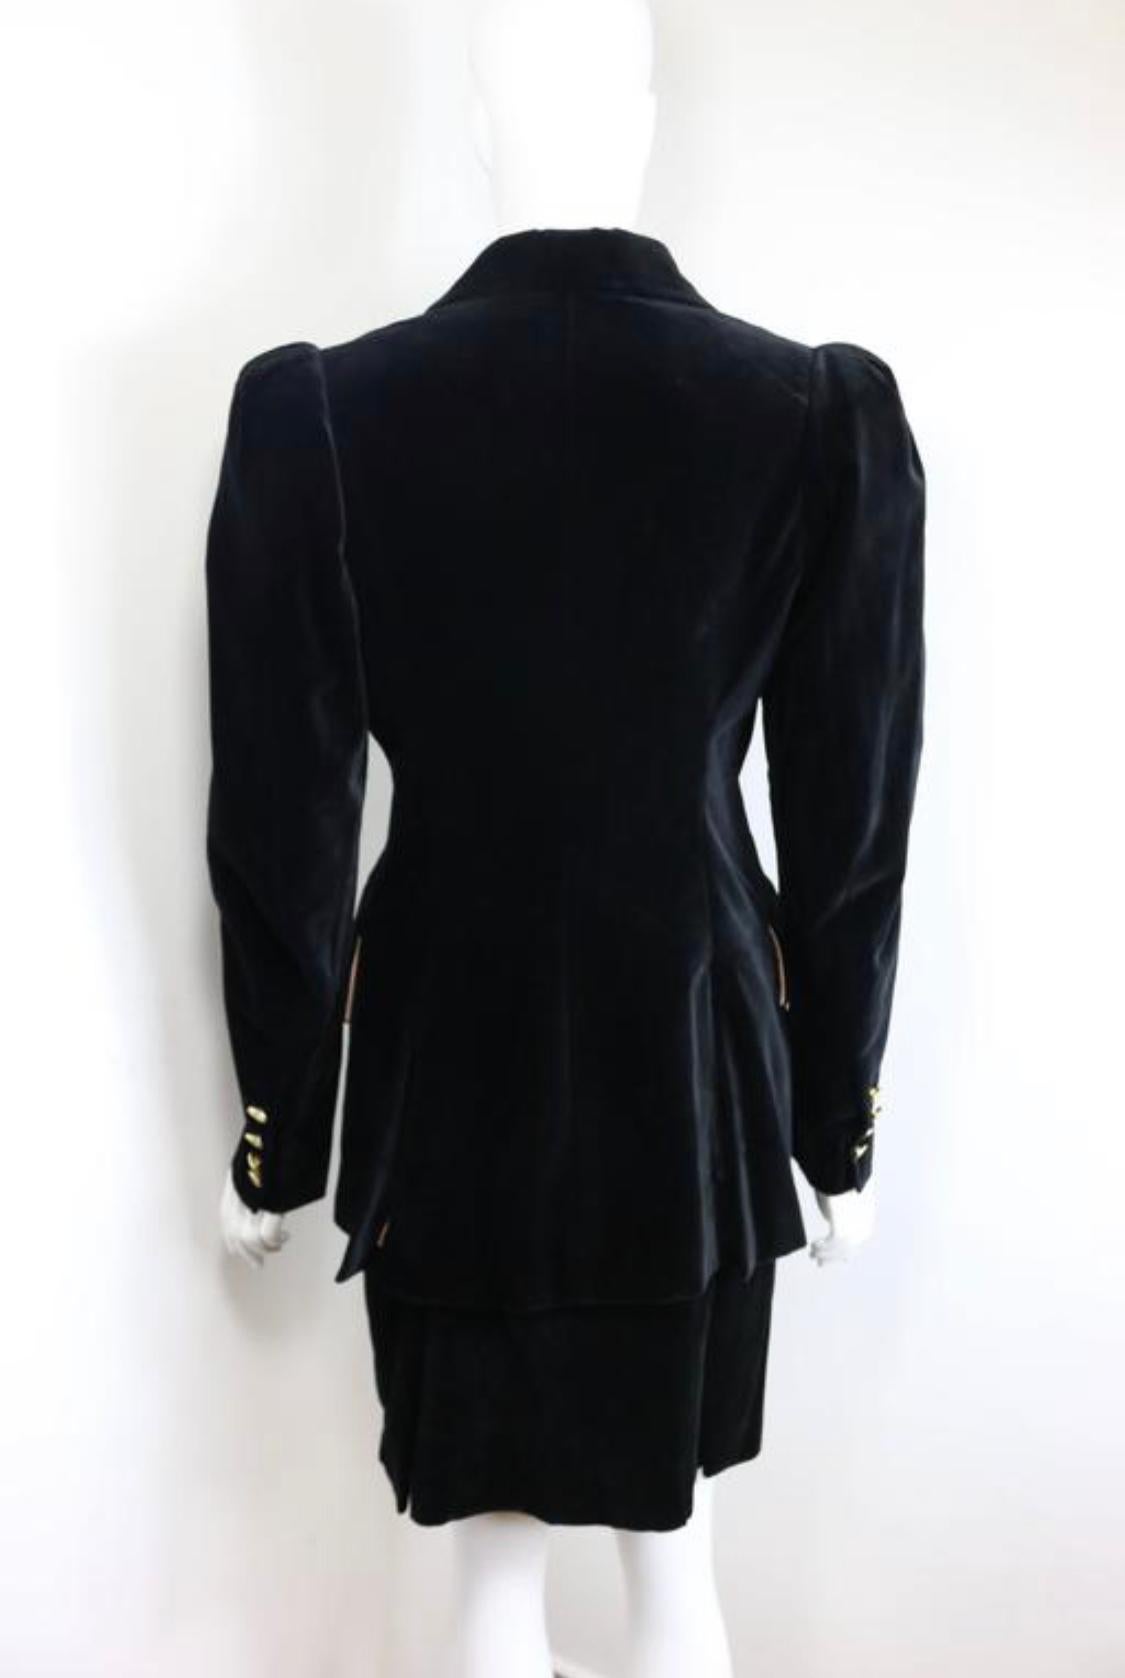 - 90s Vivienne Westwood black velvet double breasted and skirt ensembles. The statement victorian style broad shoulder padded is so Vivienne Westwood. 

- Featuring six signature gold buttons fastening and four buttons on each cuff. Two flap